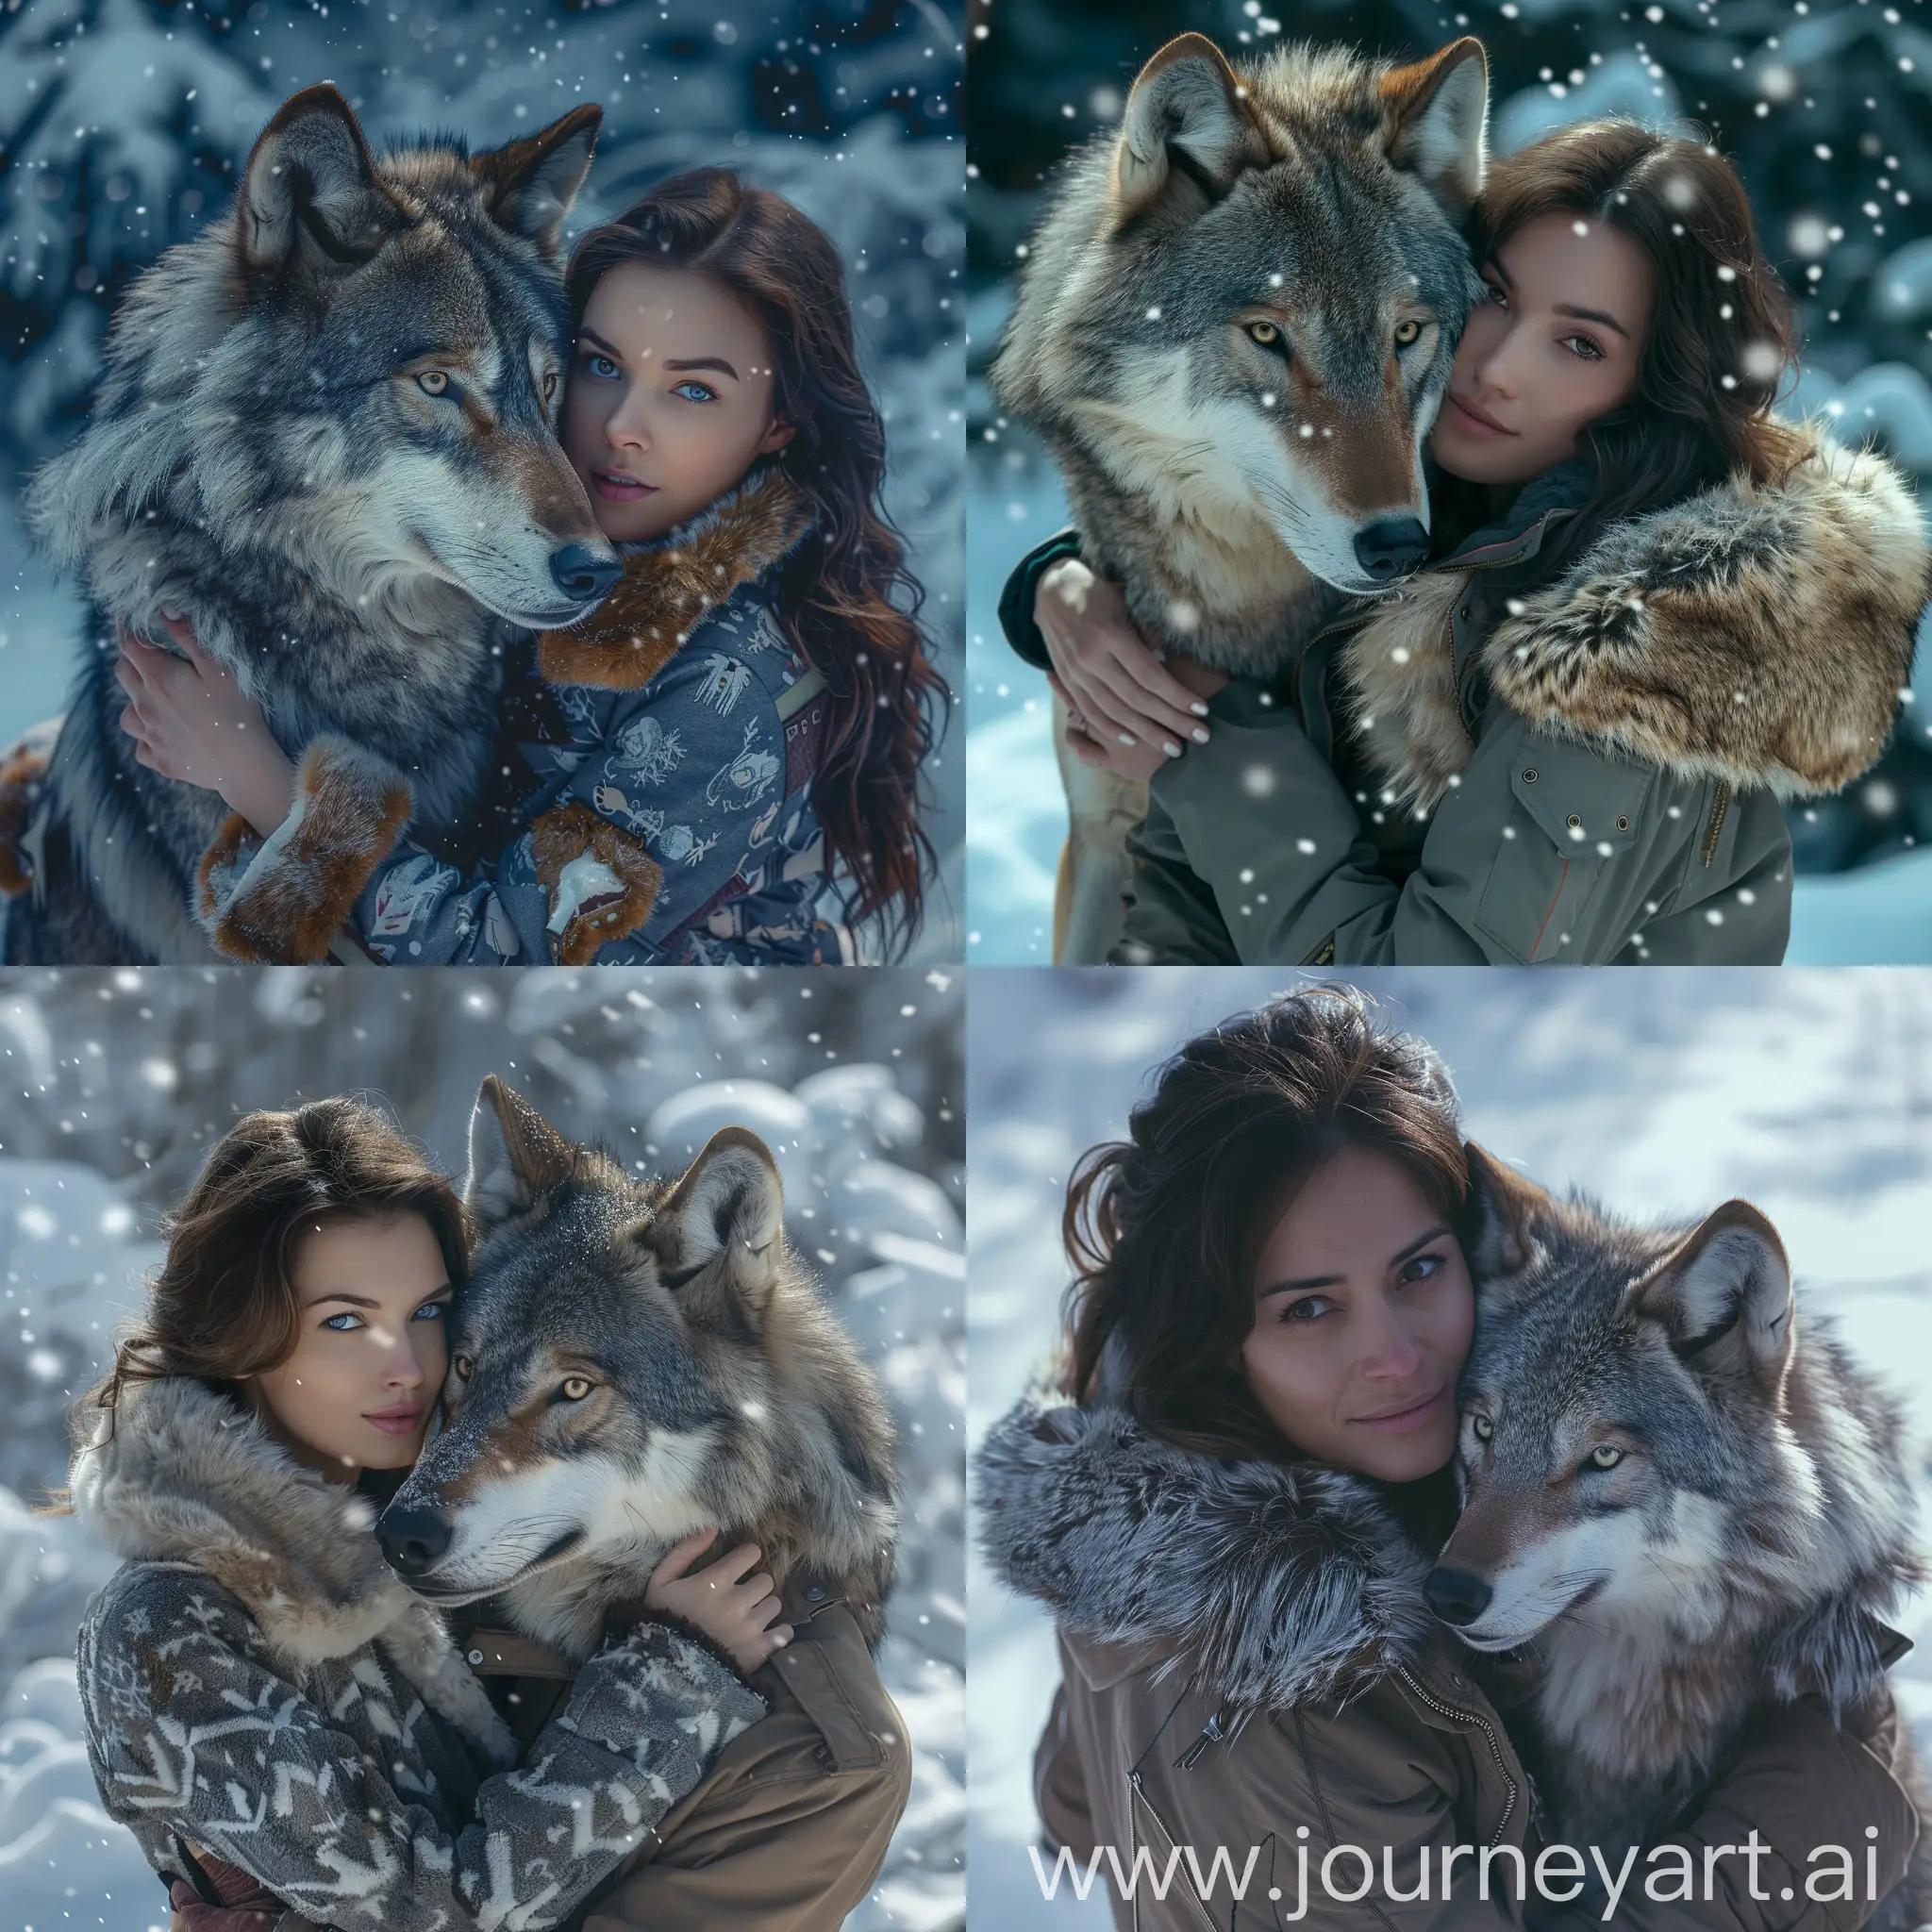 Graceful-Woman-and-Majestic-Grey-Wolf-Embracing-in-Snowy-Wilderness